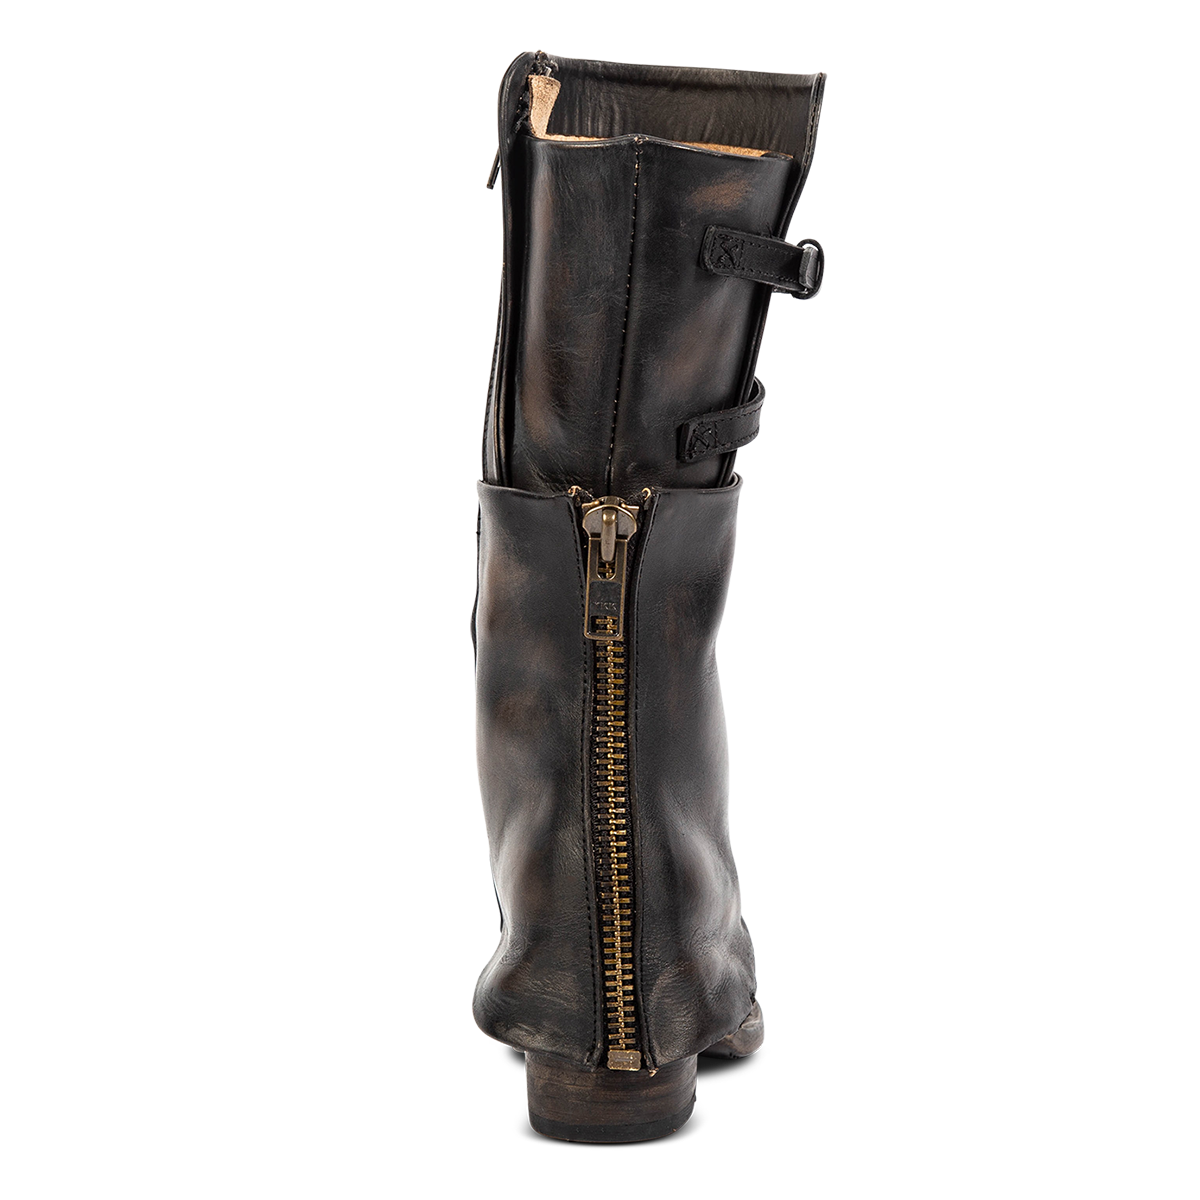 Back view showing a decorative brass shaft zipper, stacked heel and asymmetrical shaft height on FREEBIRD women's Caboose black leather boot 